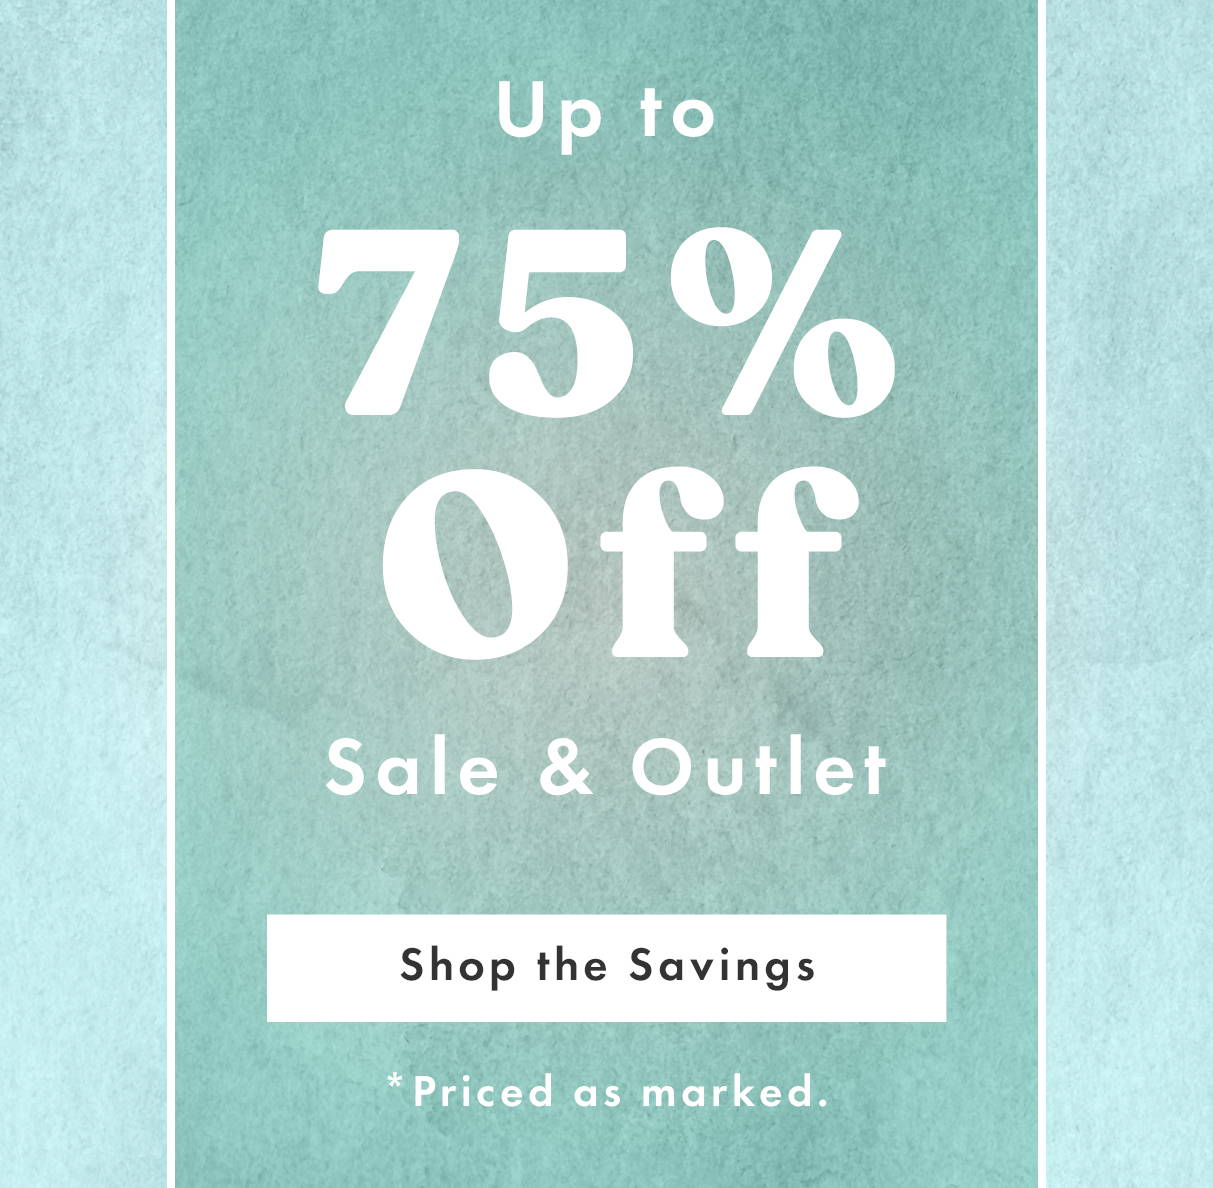 up to 75% off Sale & Outlet | SHOP THE SAVINGS